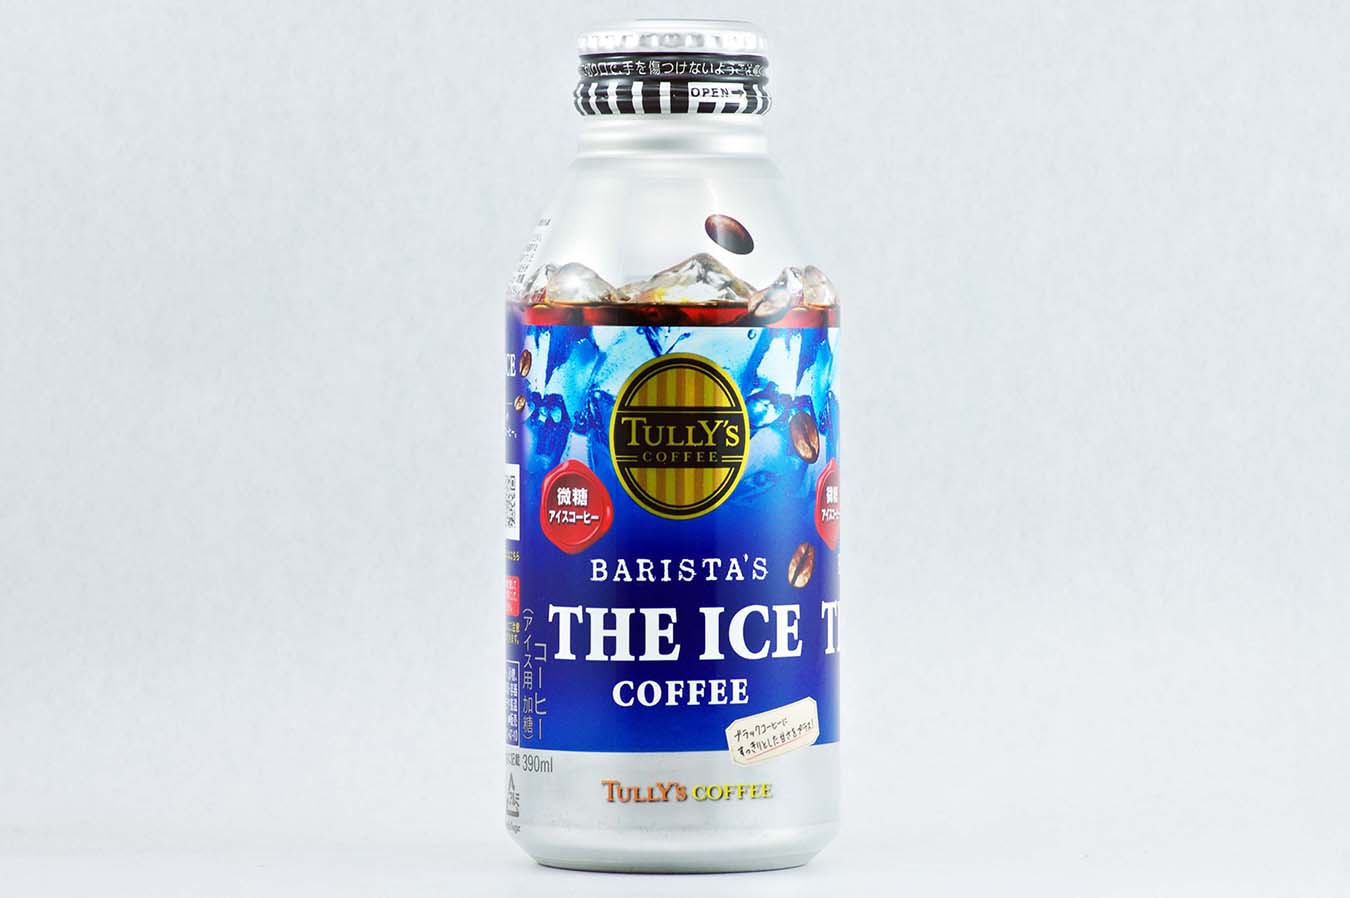 TULLY'S COFFEE BARISTA'S THE ICE COFFEE 2015年6月